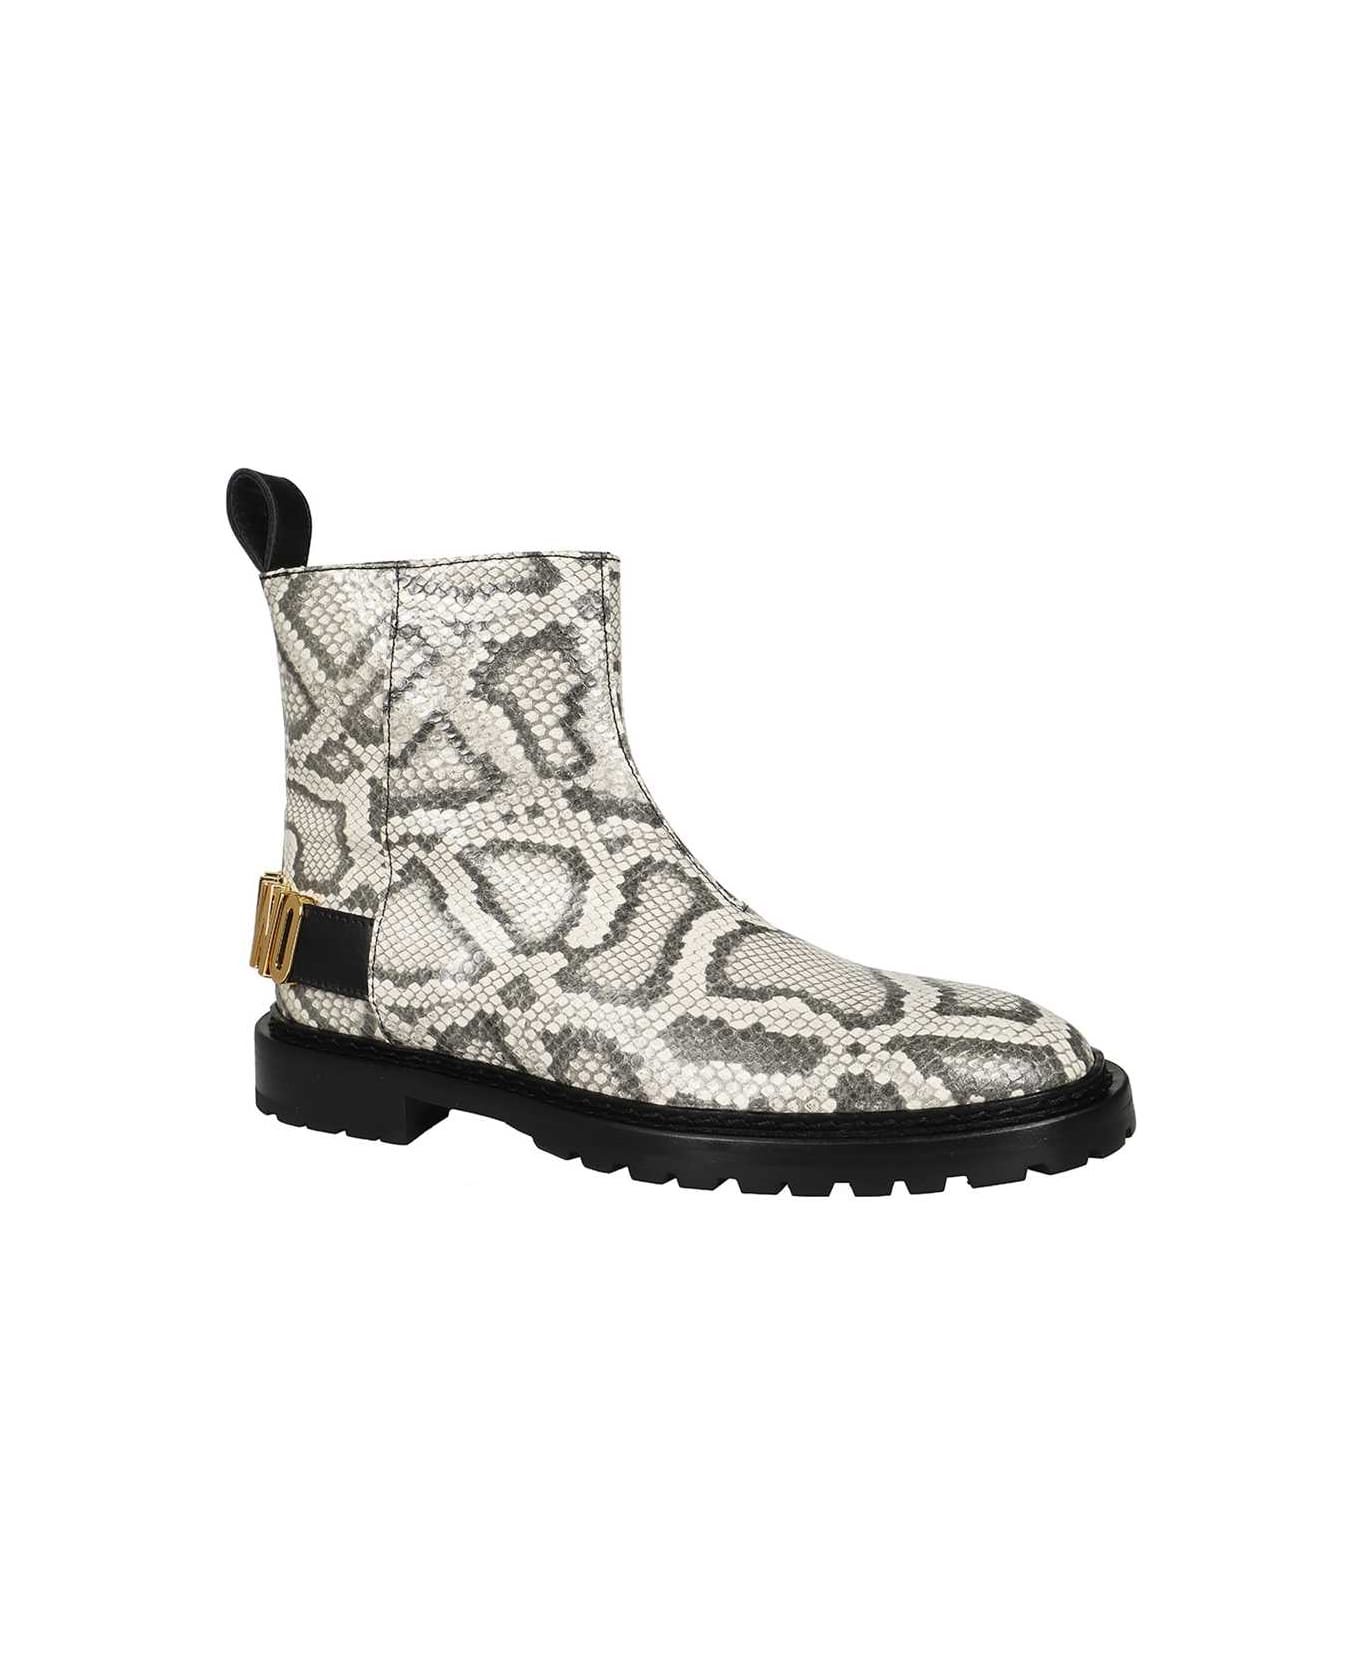 Moschino Leather Ankle Boots - Animalier